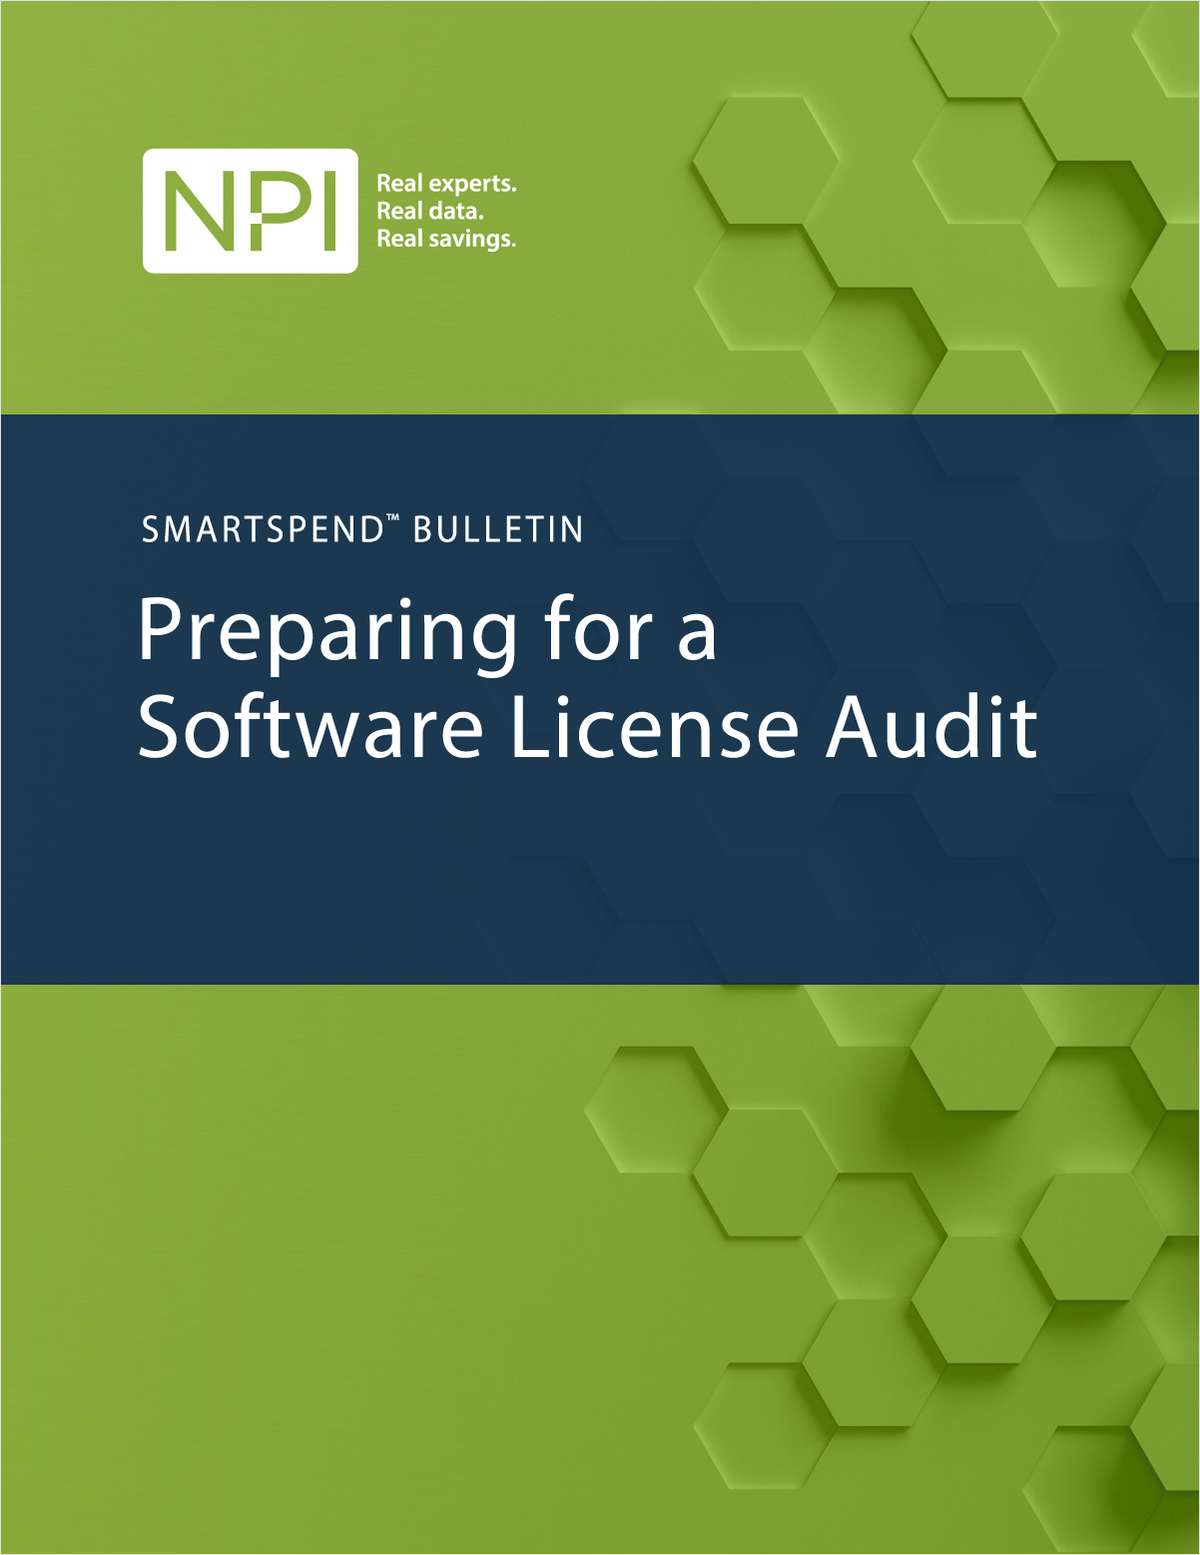 Preparing For a Software License Audit and an Optimal Outcome